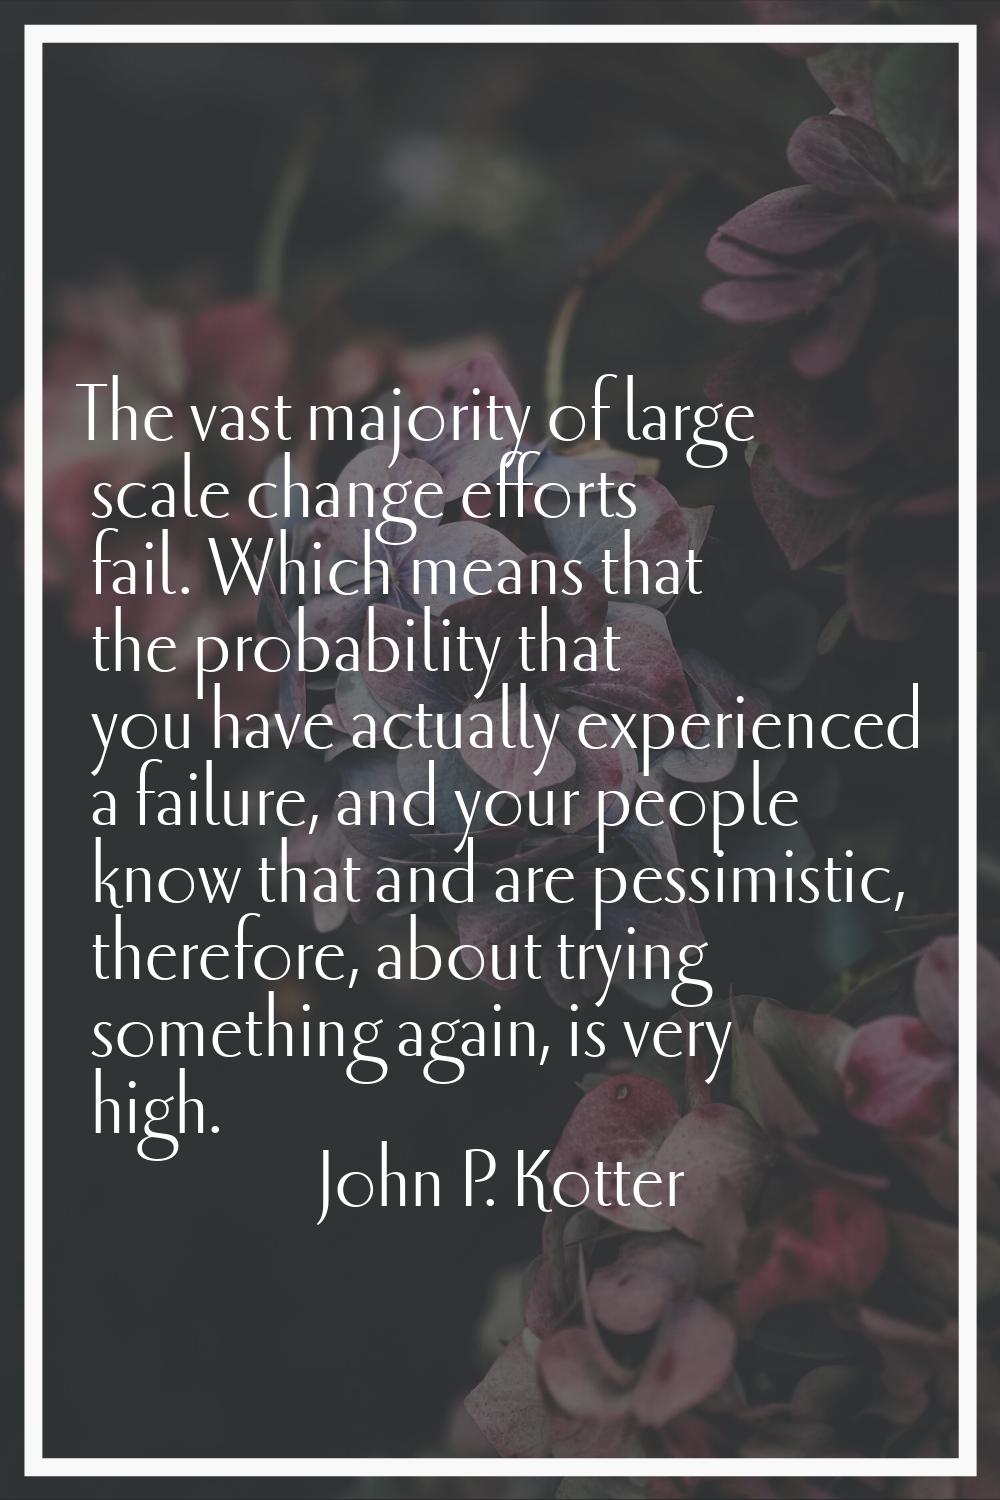 The vast majority of large scale change efforts fail. Which means that the probability that you hav